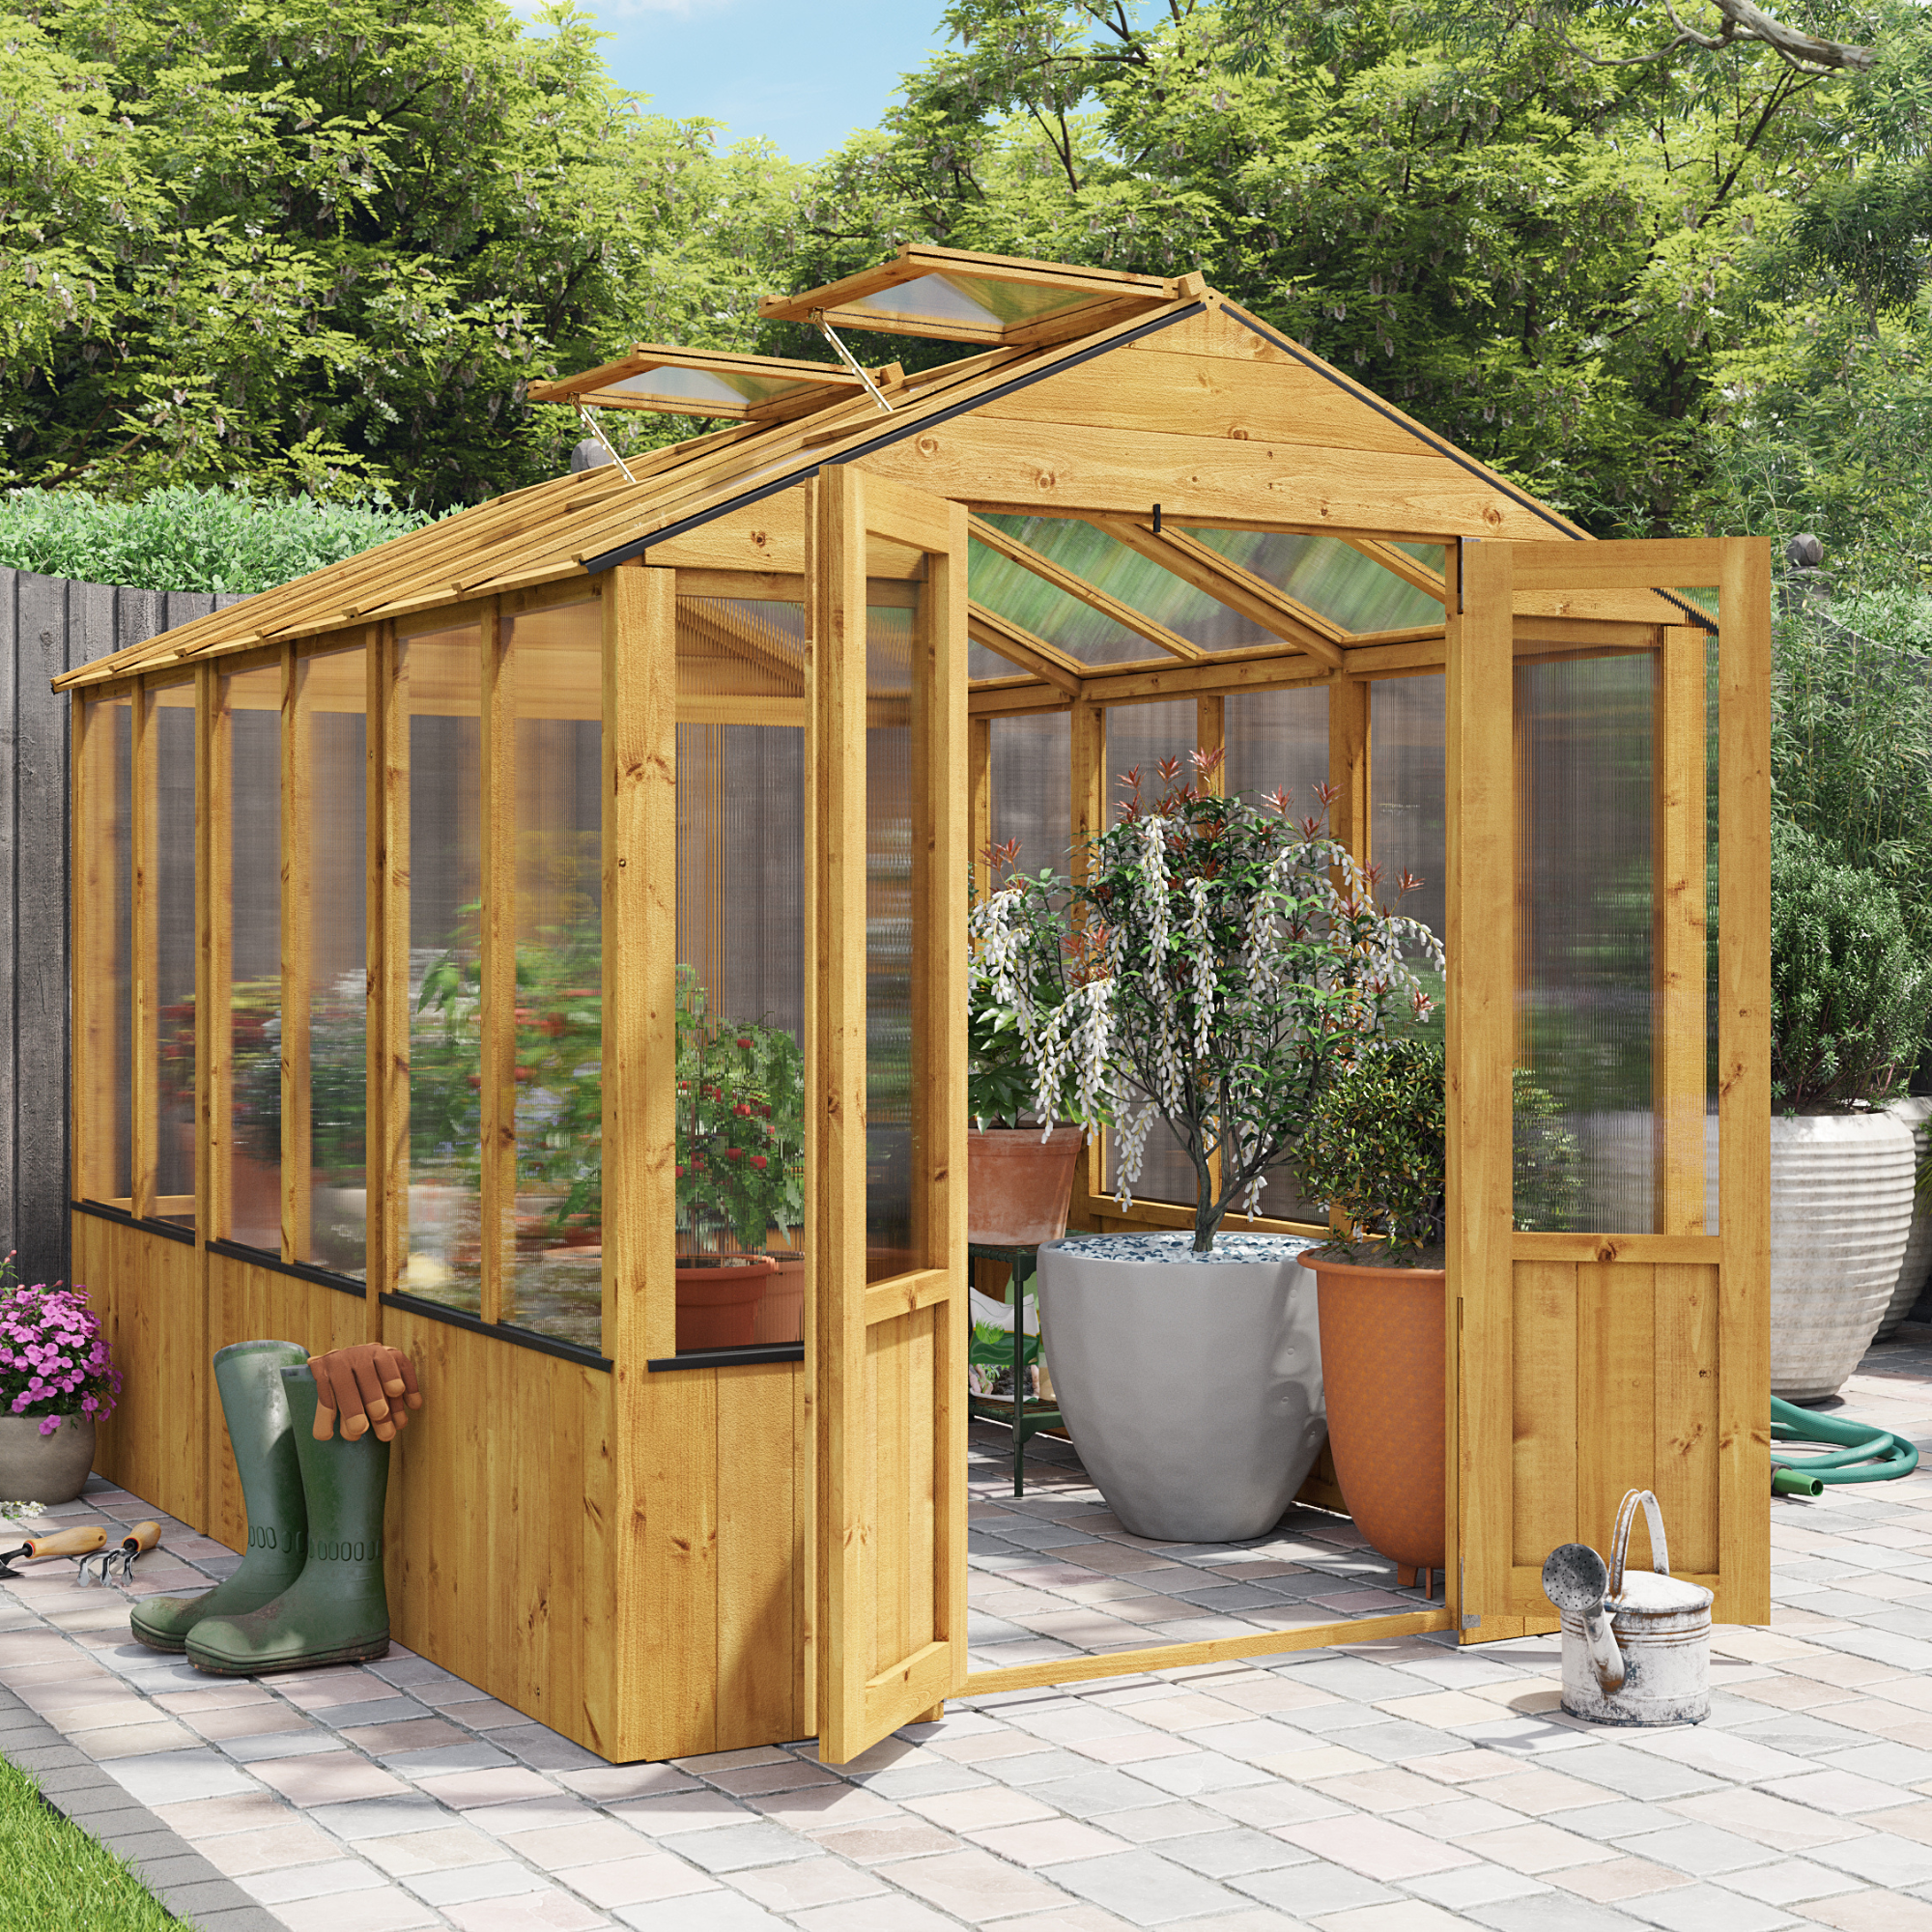 9x6 Wooden Polycarbonate Greenhouse with Opening Roof Vent | BillyOh 4000 Lincoln